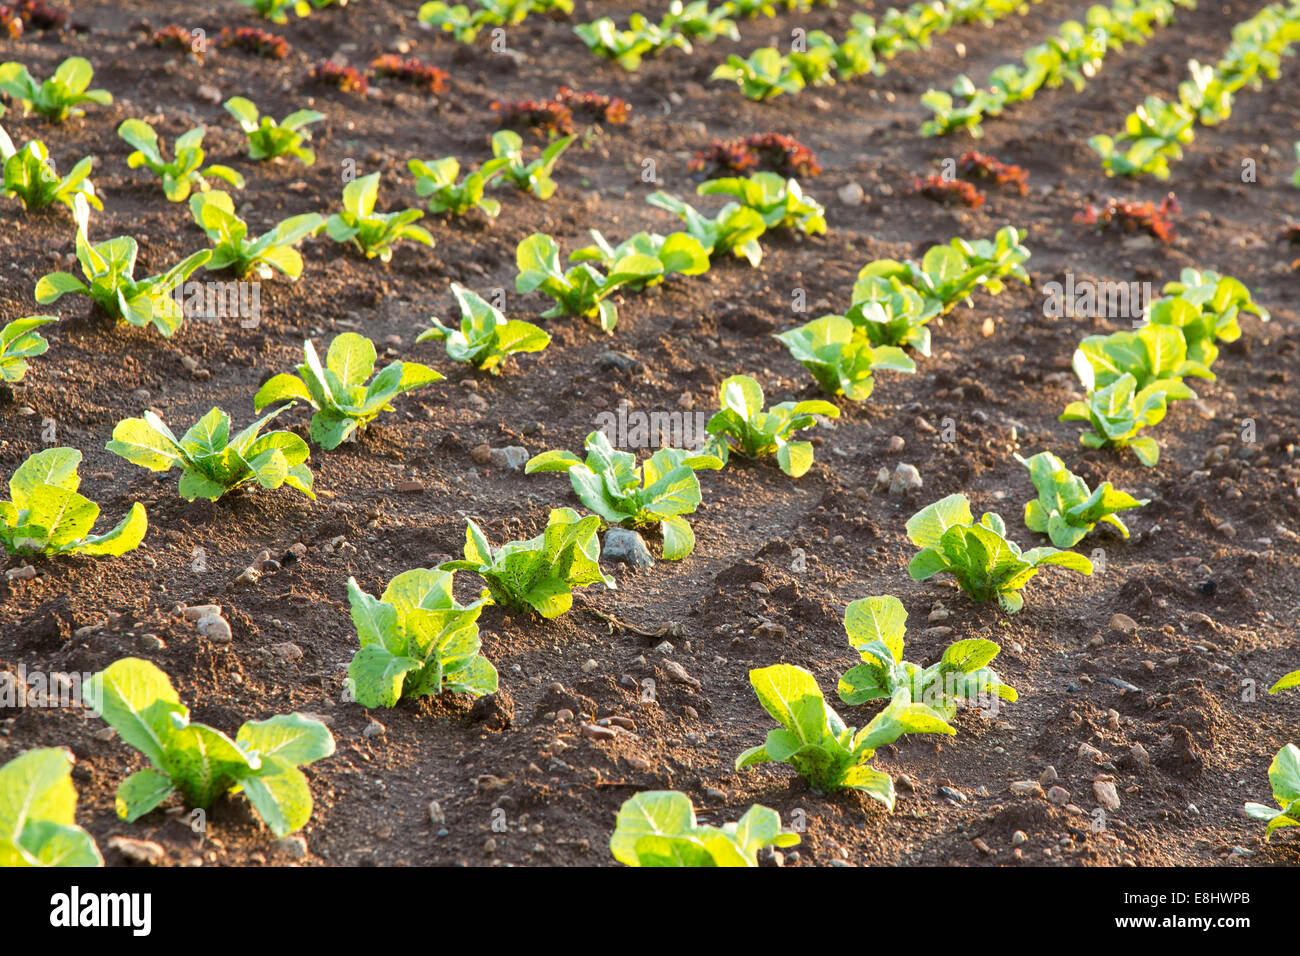 young red and green lettuces growing in field, Es Pla plain, Mallorca, Spain, August, Stock Photo